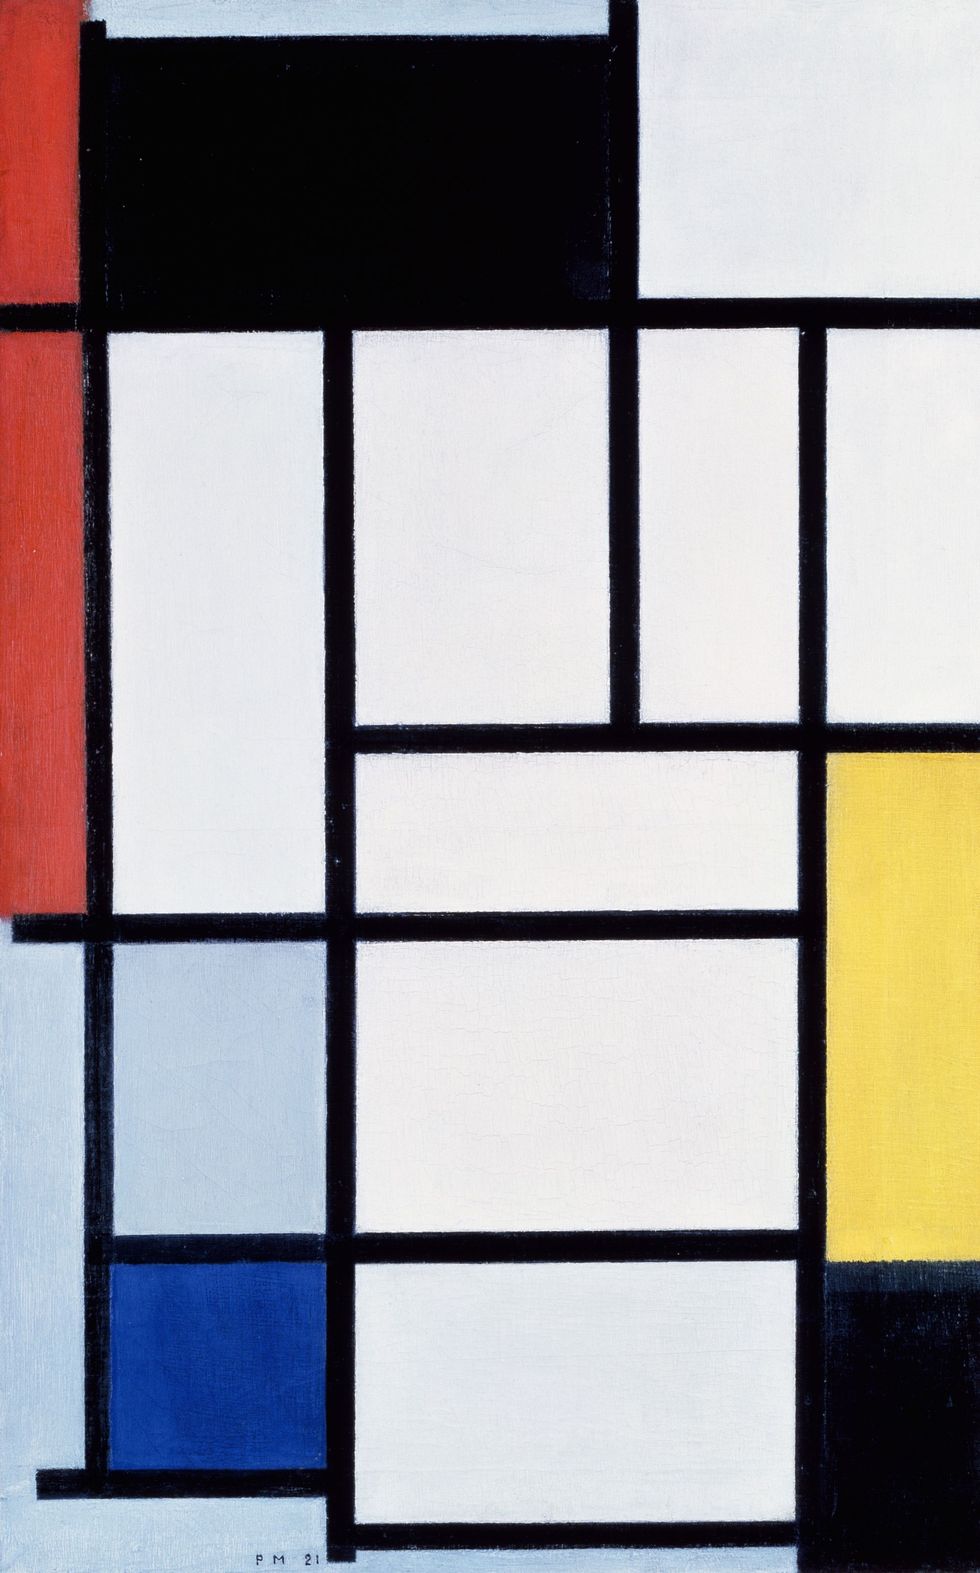 Colorfulness, Line, Rectangle, Tints and shades, Square, Parallel, Symmetry, 